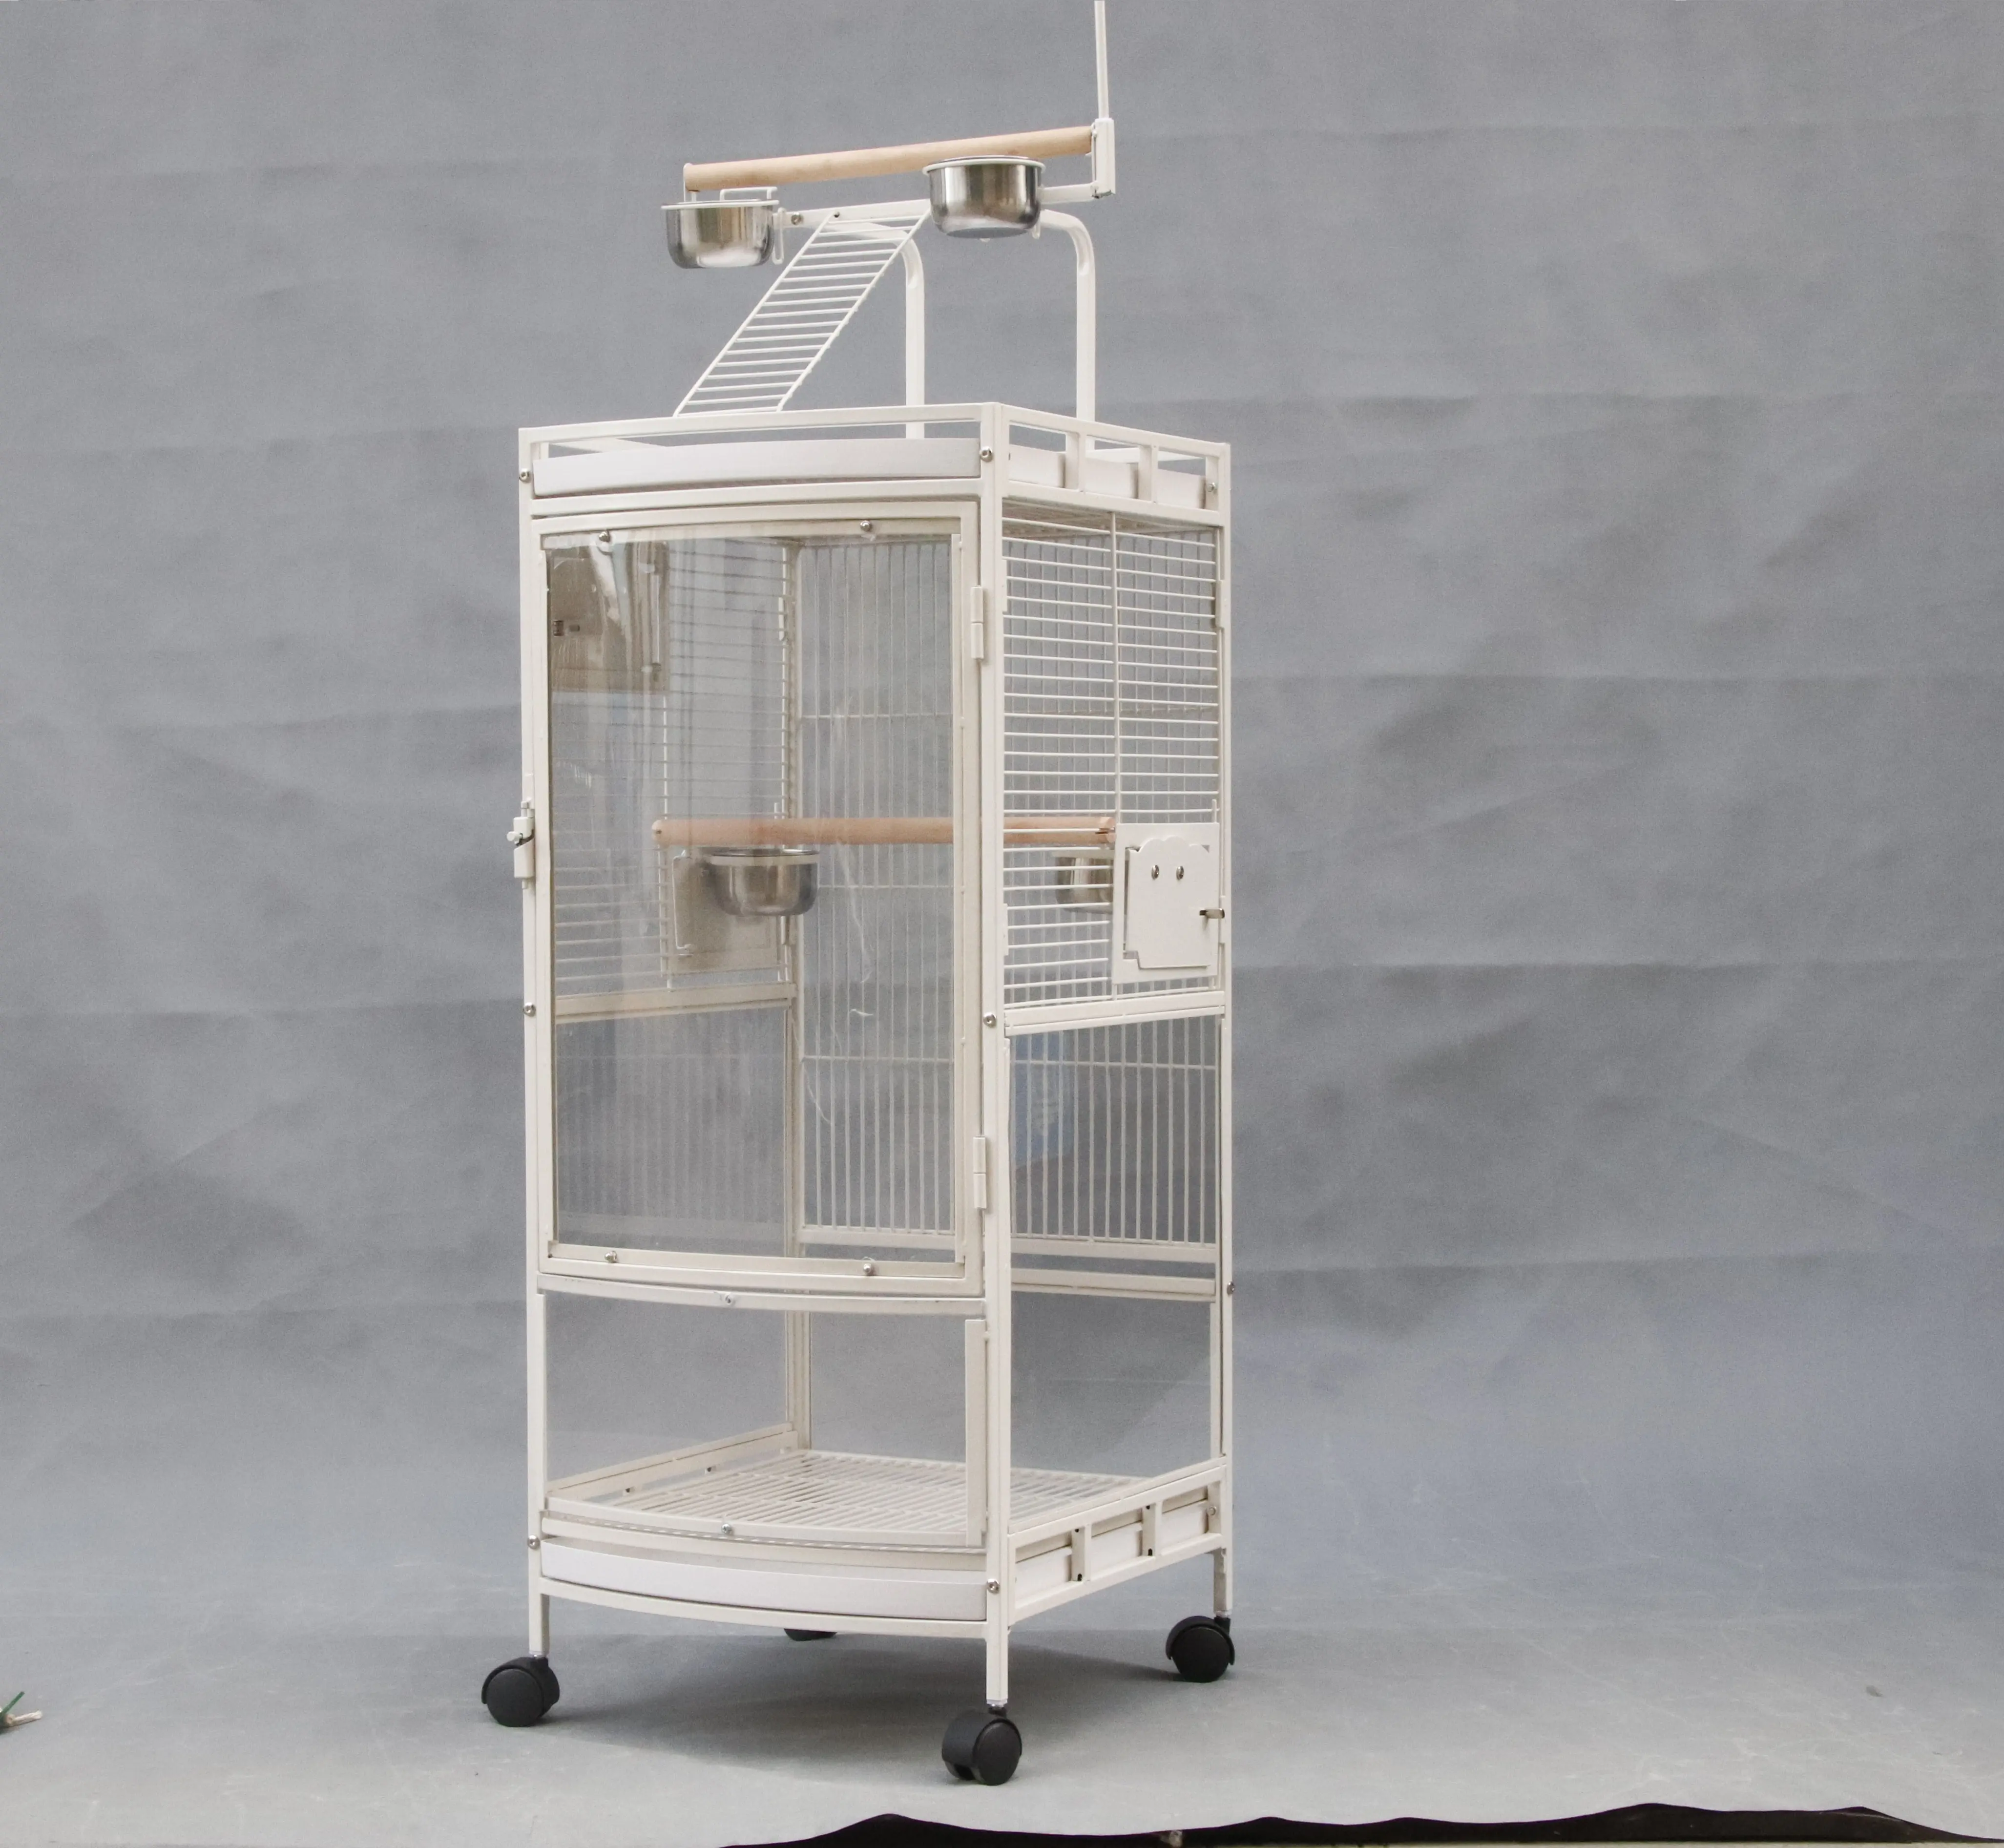 New Style Acrylic Bird Cage with Rolling Stand for Large Parrots Conure Lovebird Cockatiel Pigeon Cages